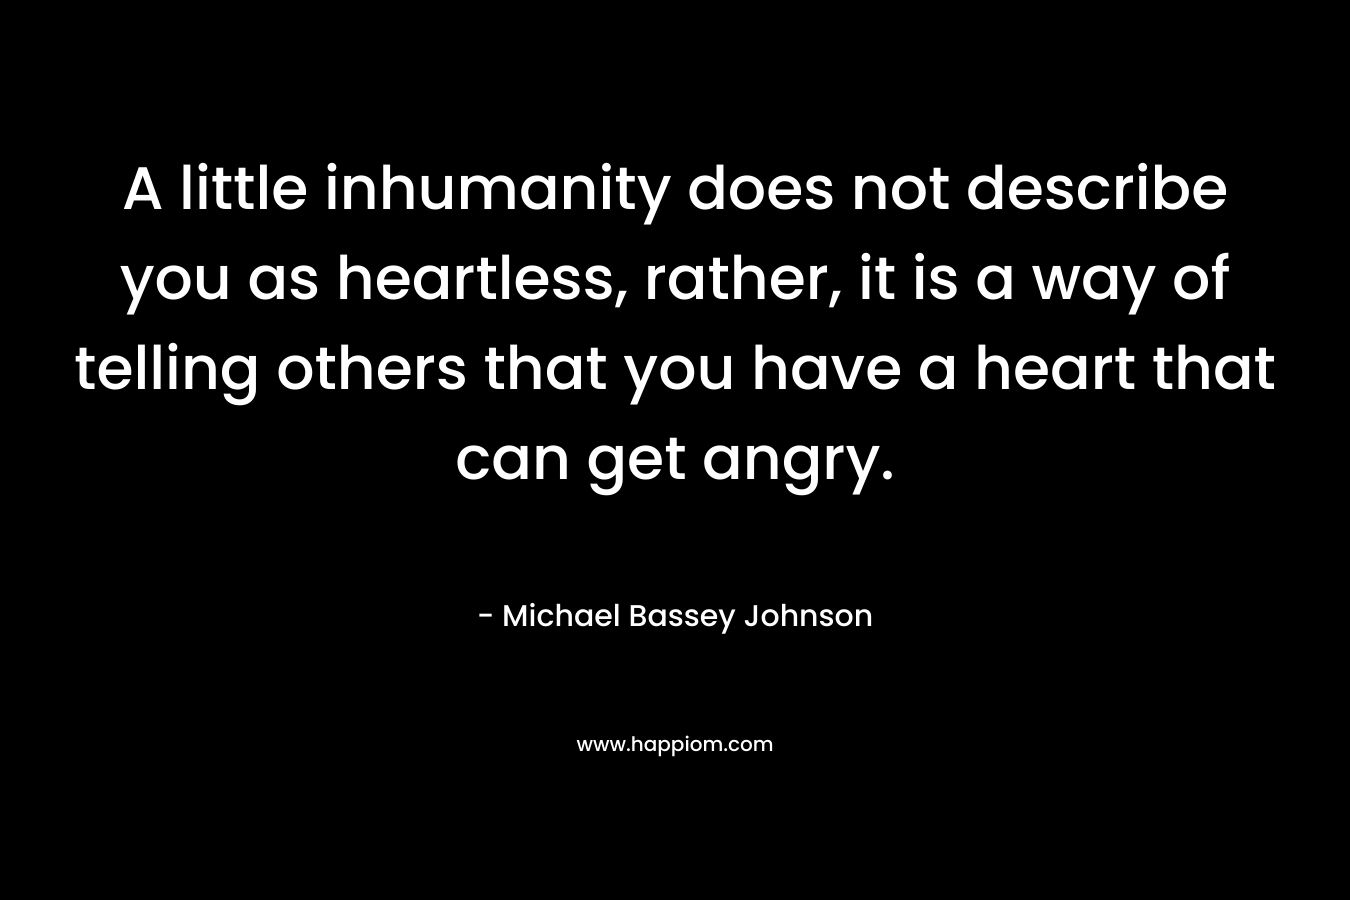 A little inhumanity does not describe you as heartless, rather, it is a way of telling others that you have a heart that can get angry.